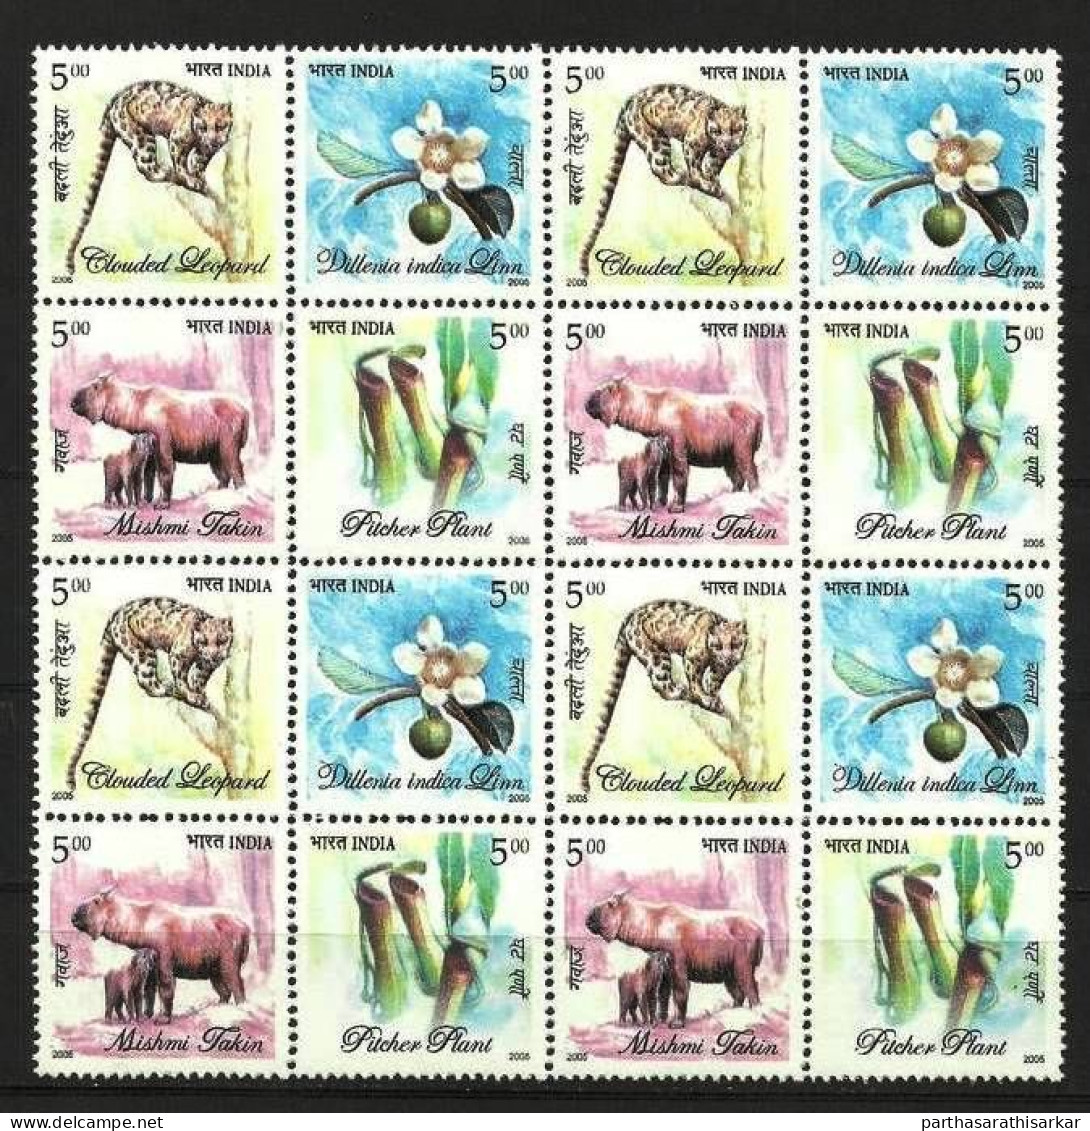 INDIA 2005 FLORA AND FAUNA OF NORTH EAST INDIA COMPLETE SE-TANENT BLOCK OF 4 MNH RARE - Nuevos